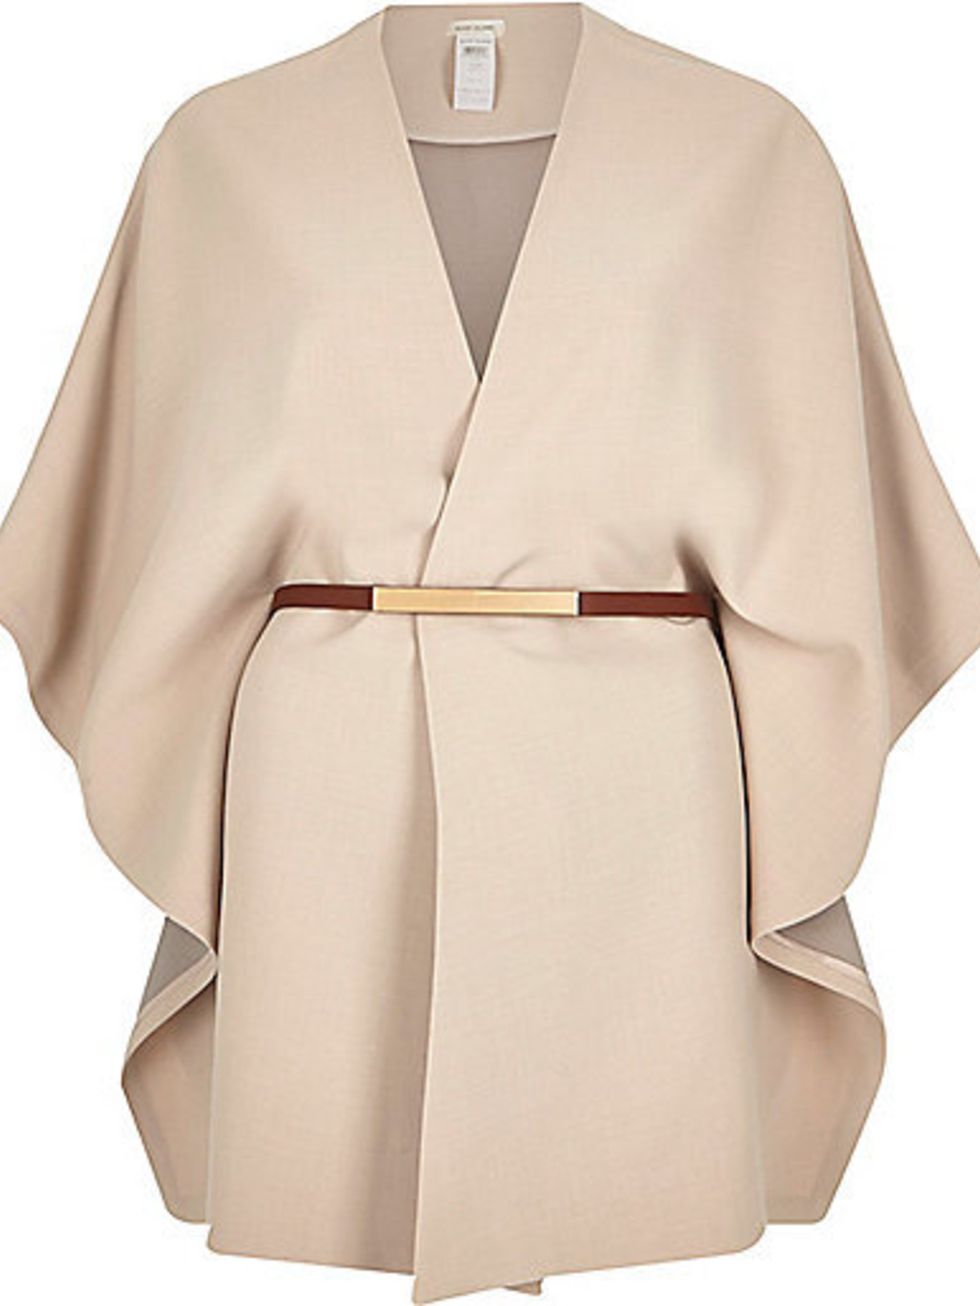 <p>River Island cape, £55 </p>

<p>( £41.25 with your October ELLE discount) </p>